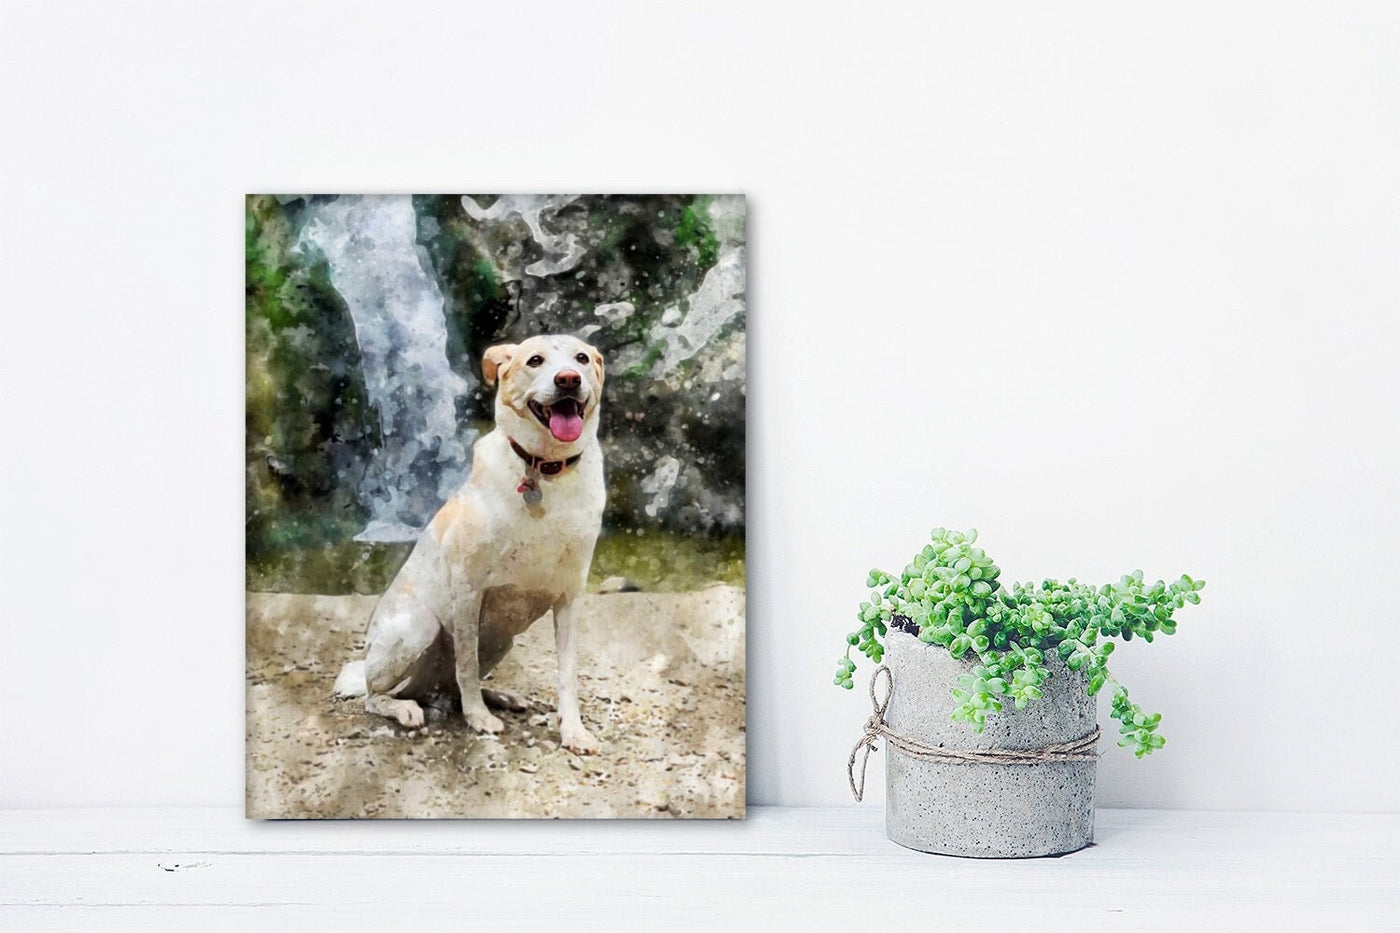 Dog family portrait by photo on canvas Birthday gift for friend Dog mom gift Dog parents gift Pet portrait Painting from photo Watercolor